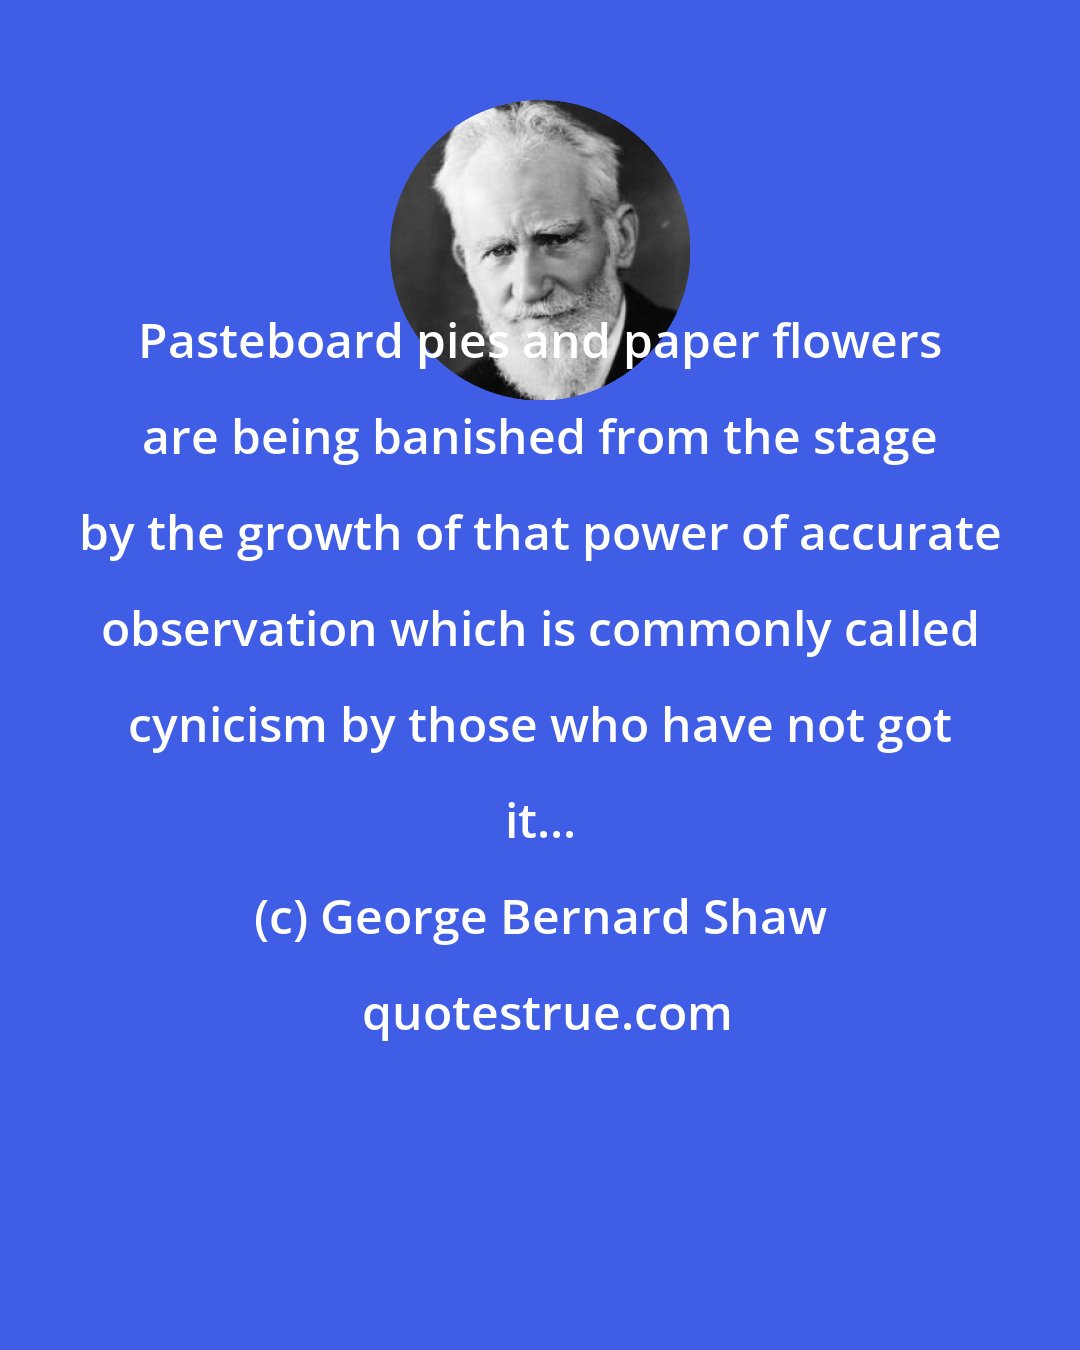 George Bernard Shaw: Pasteboard pies and paper flowers are being banished from the stage by the growth of that power of accurate observation which is commonly called cynicism by those who have not got it...